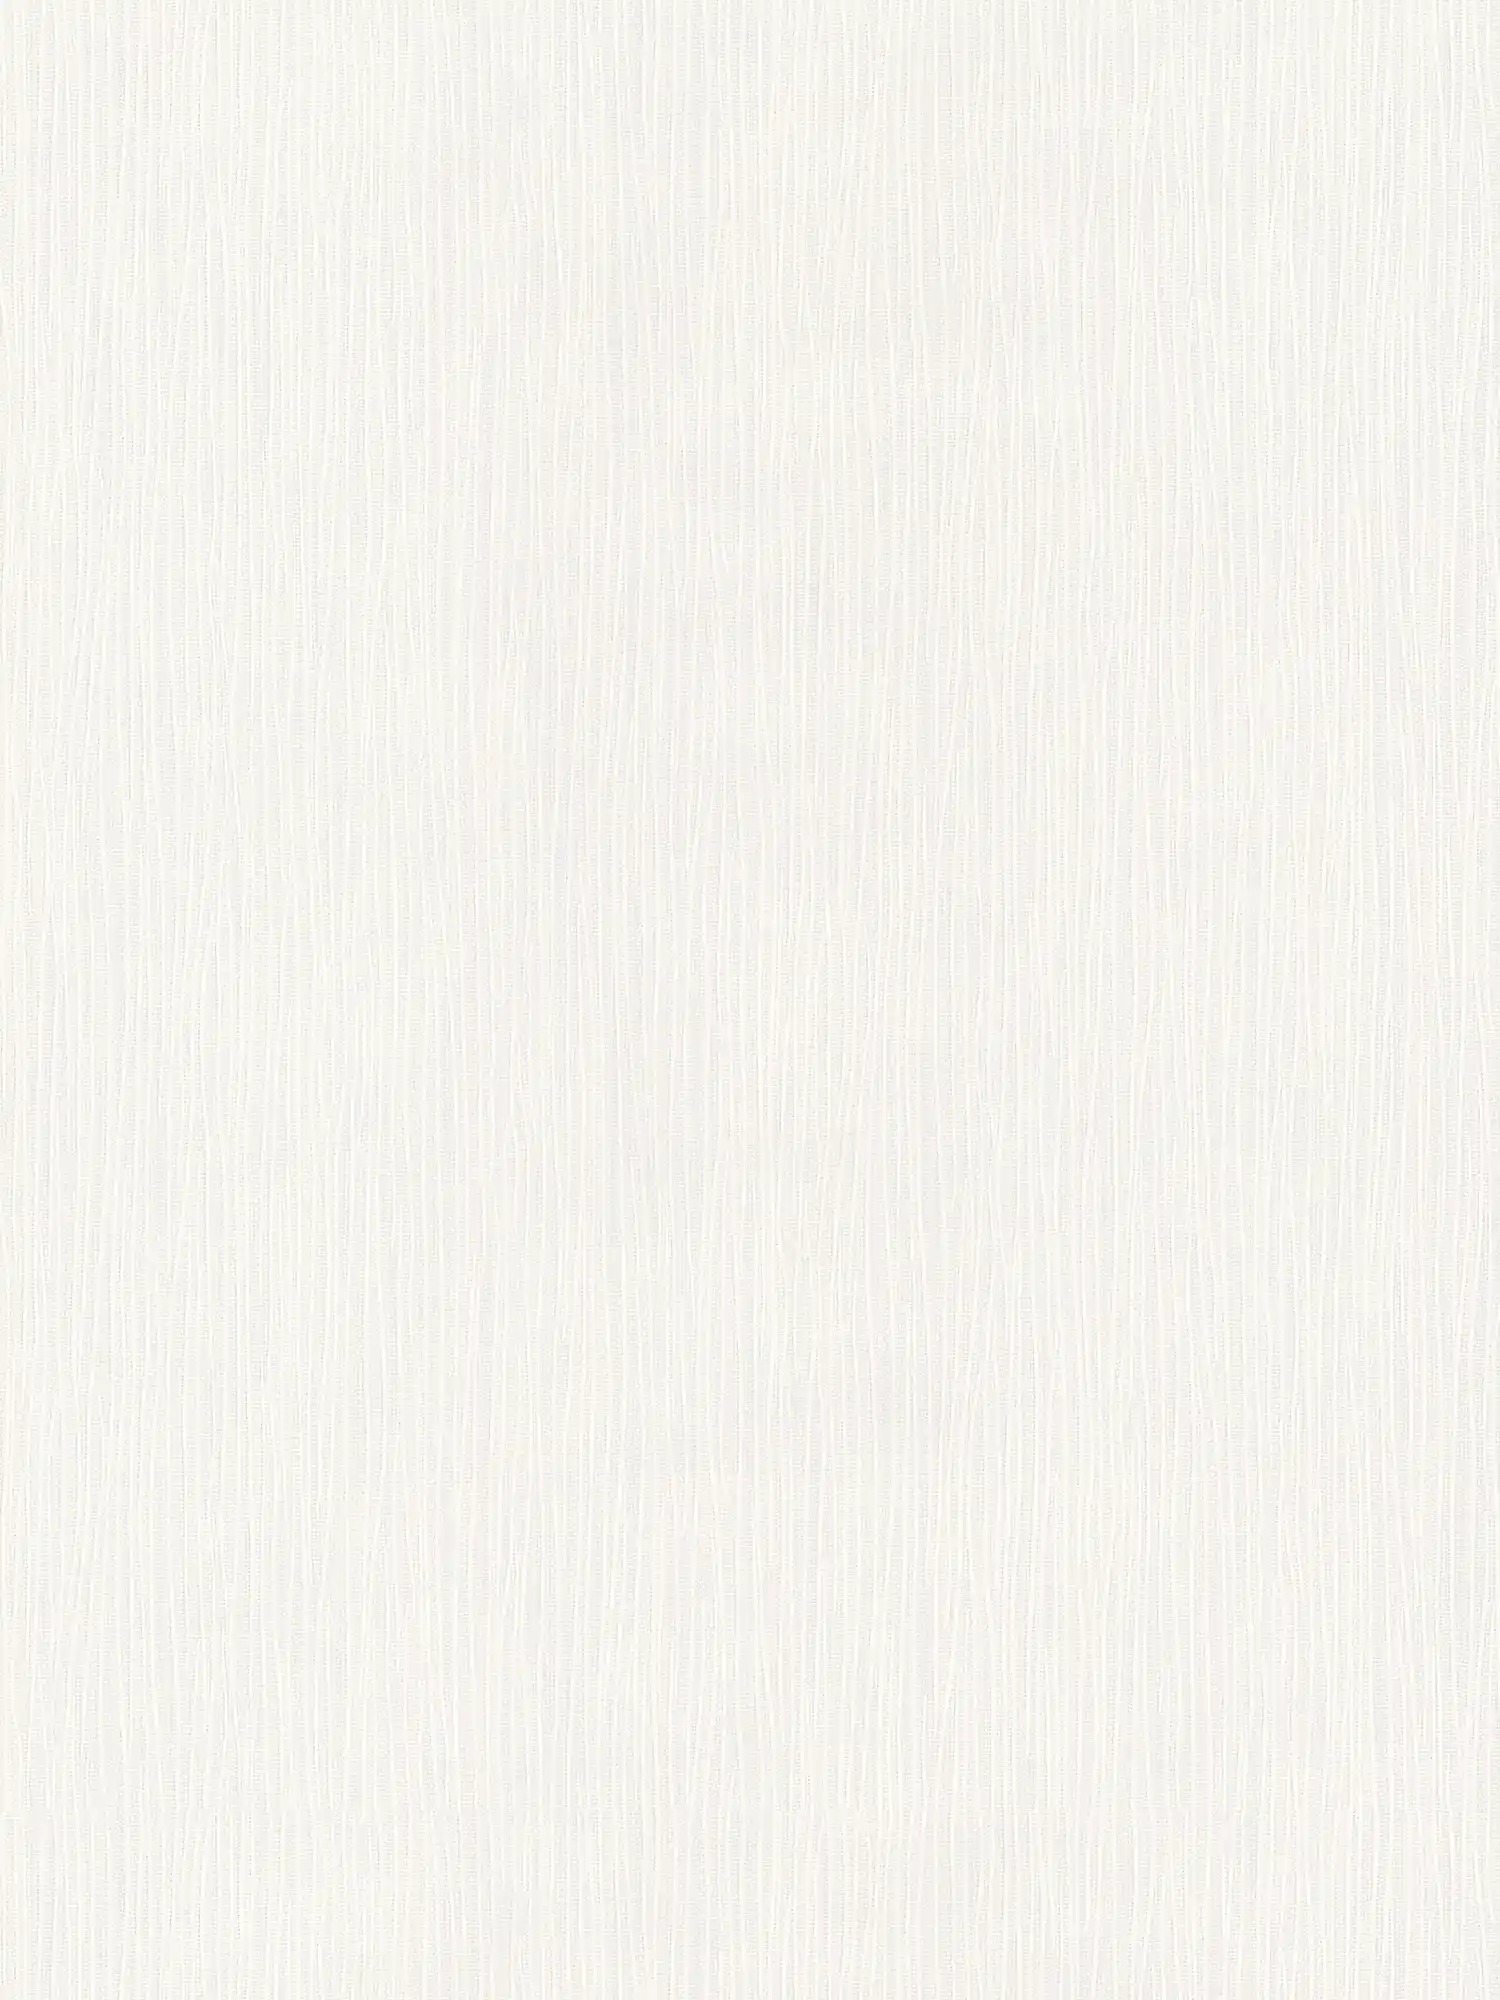 Wallpaper white with line structure
